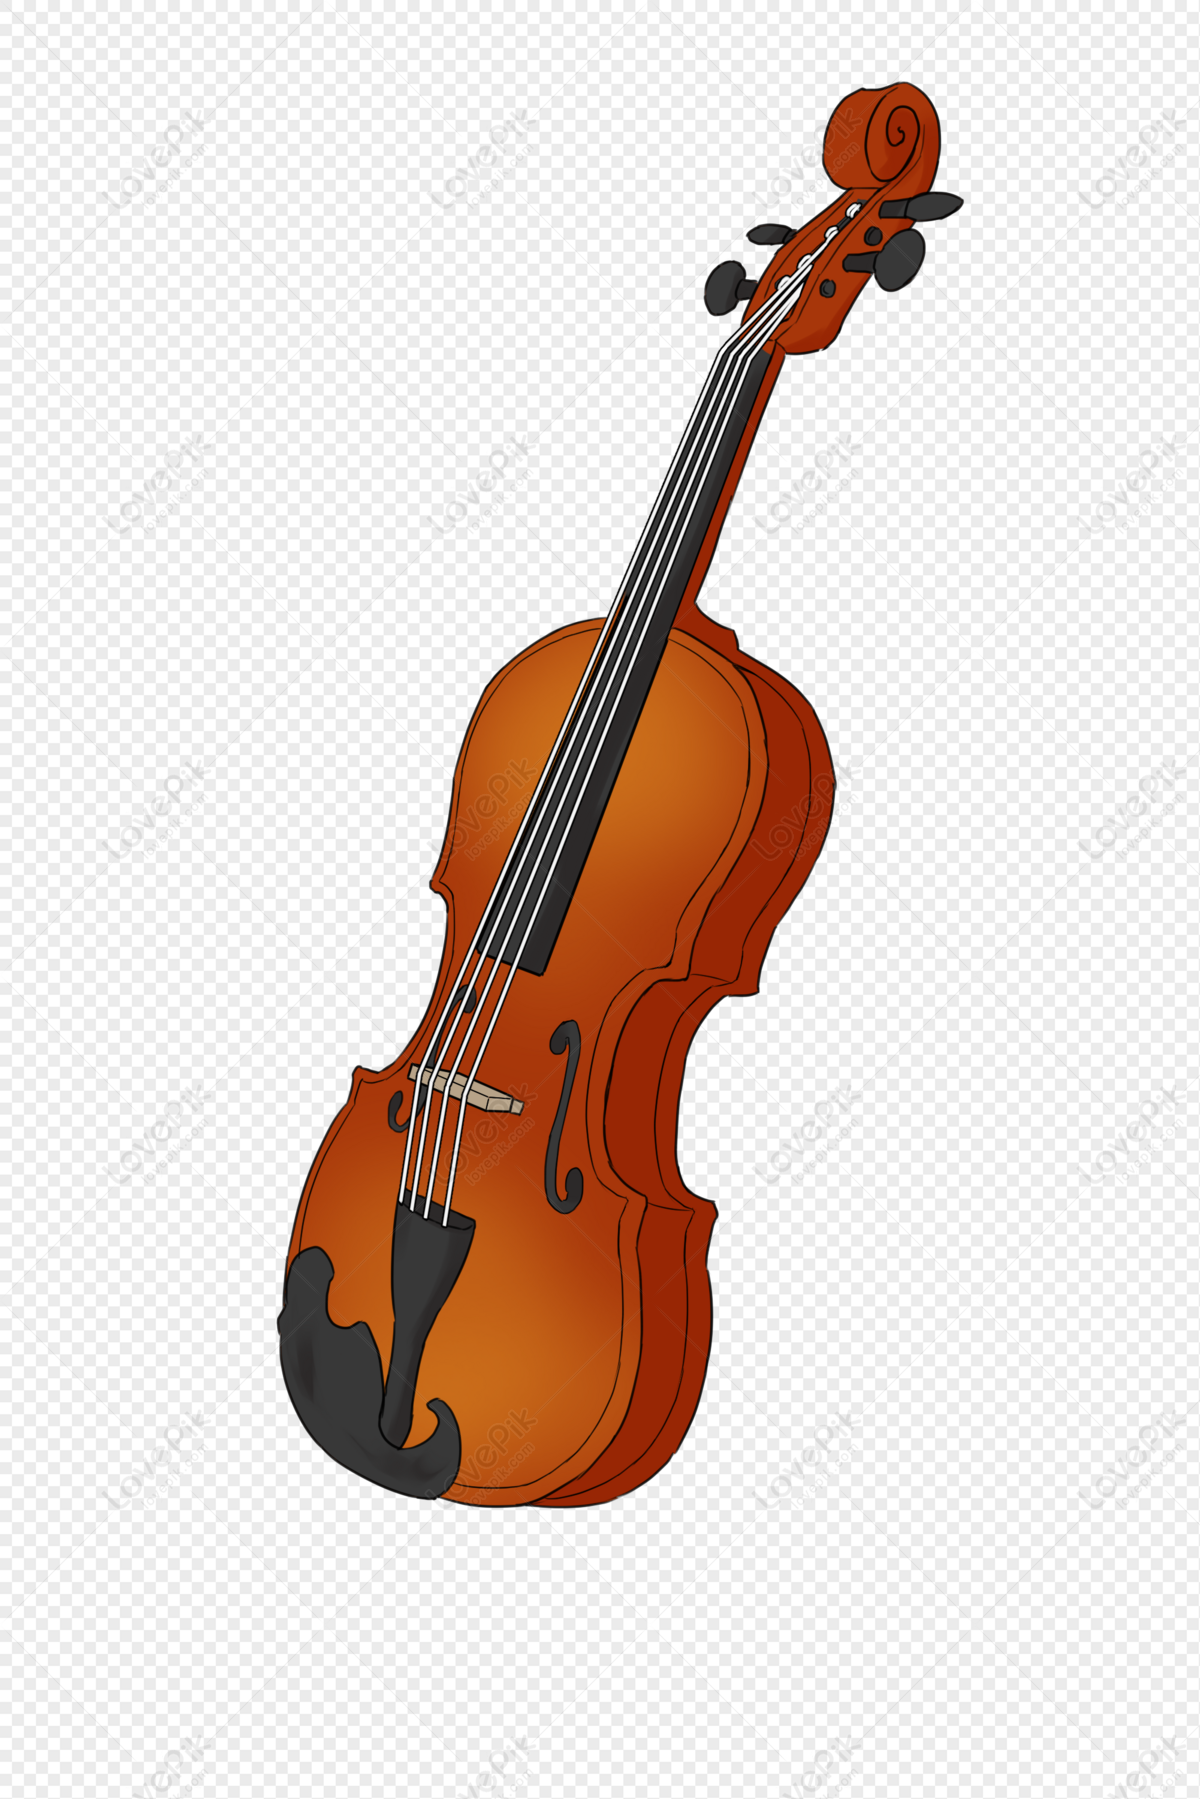 Hand Painted Violin Side Vector Free Material PNG Transparent Background  And Clipart Image For Free Download - Lovepik | 401296140